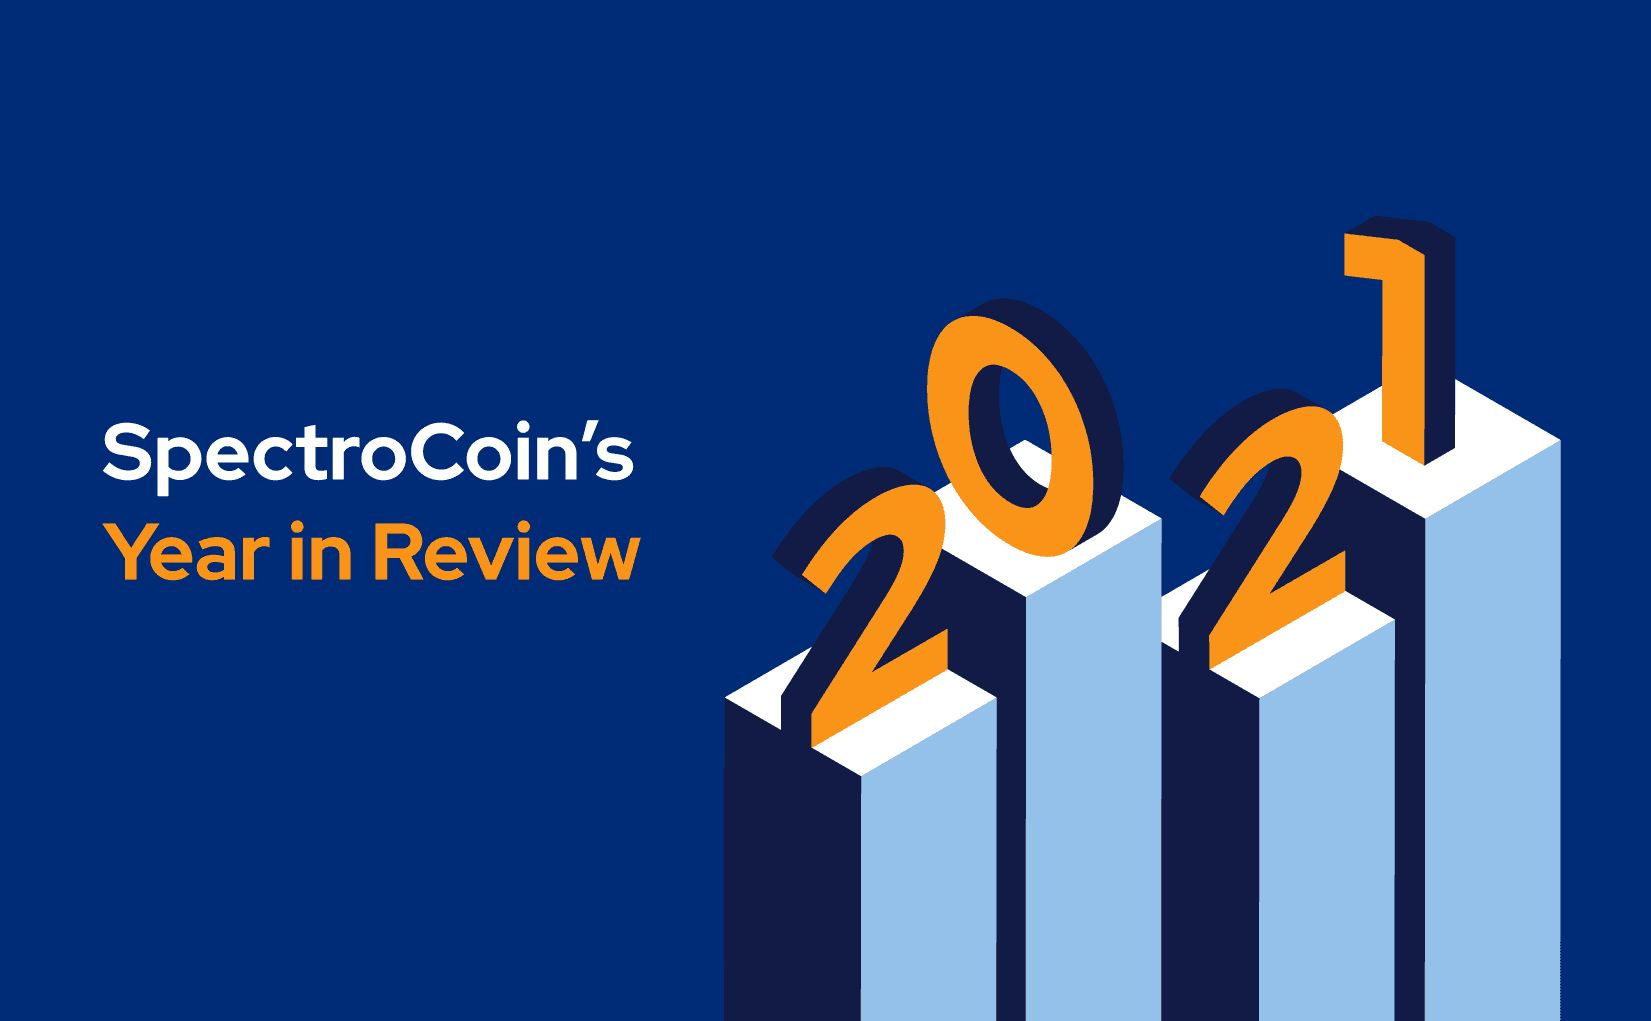 SpectroCoin’s Year in Review